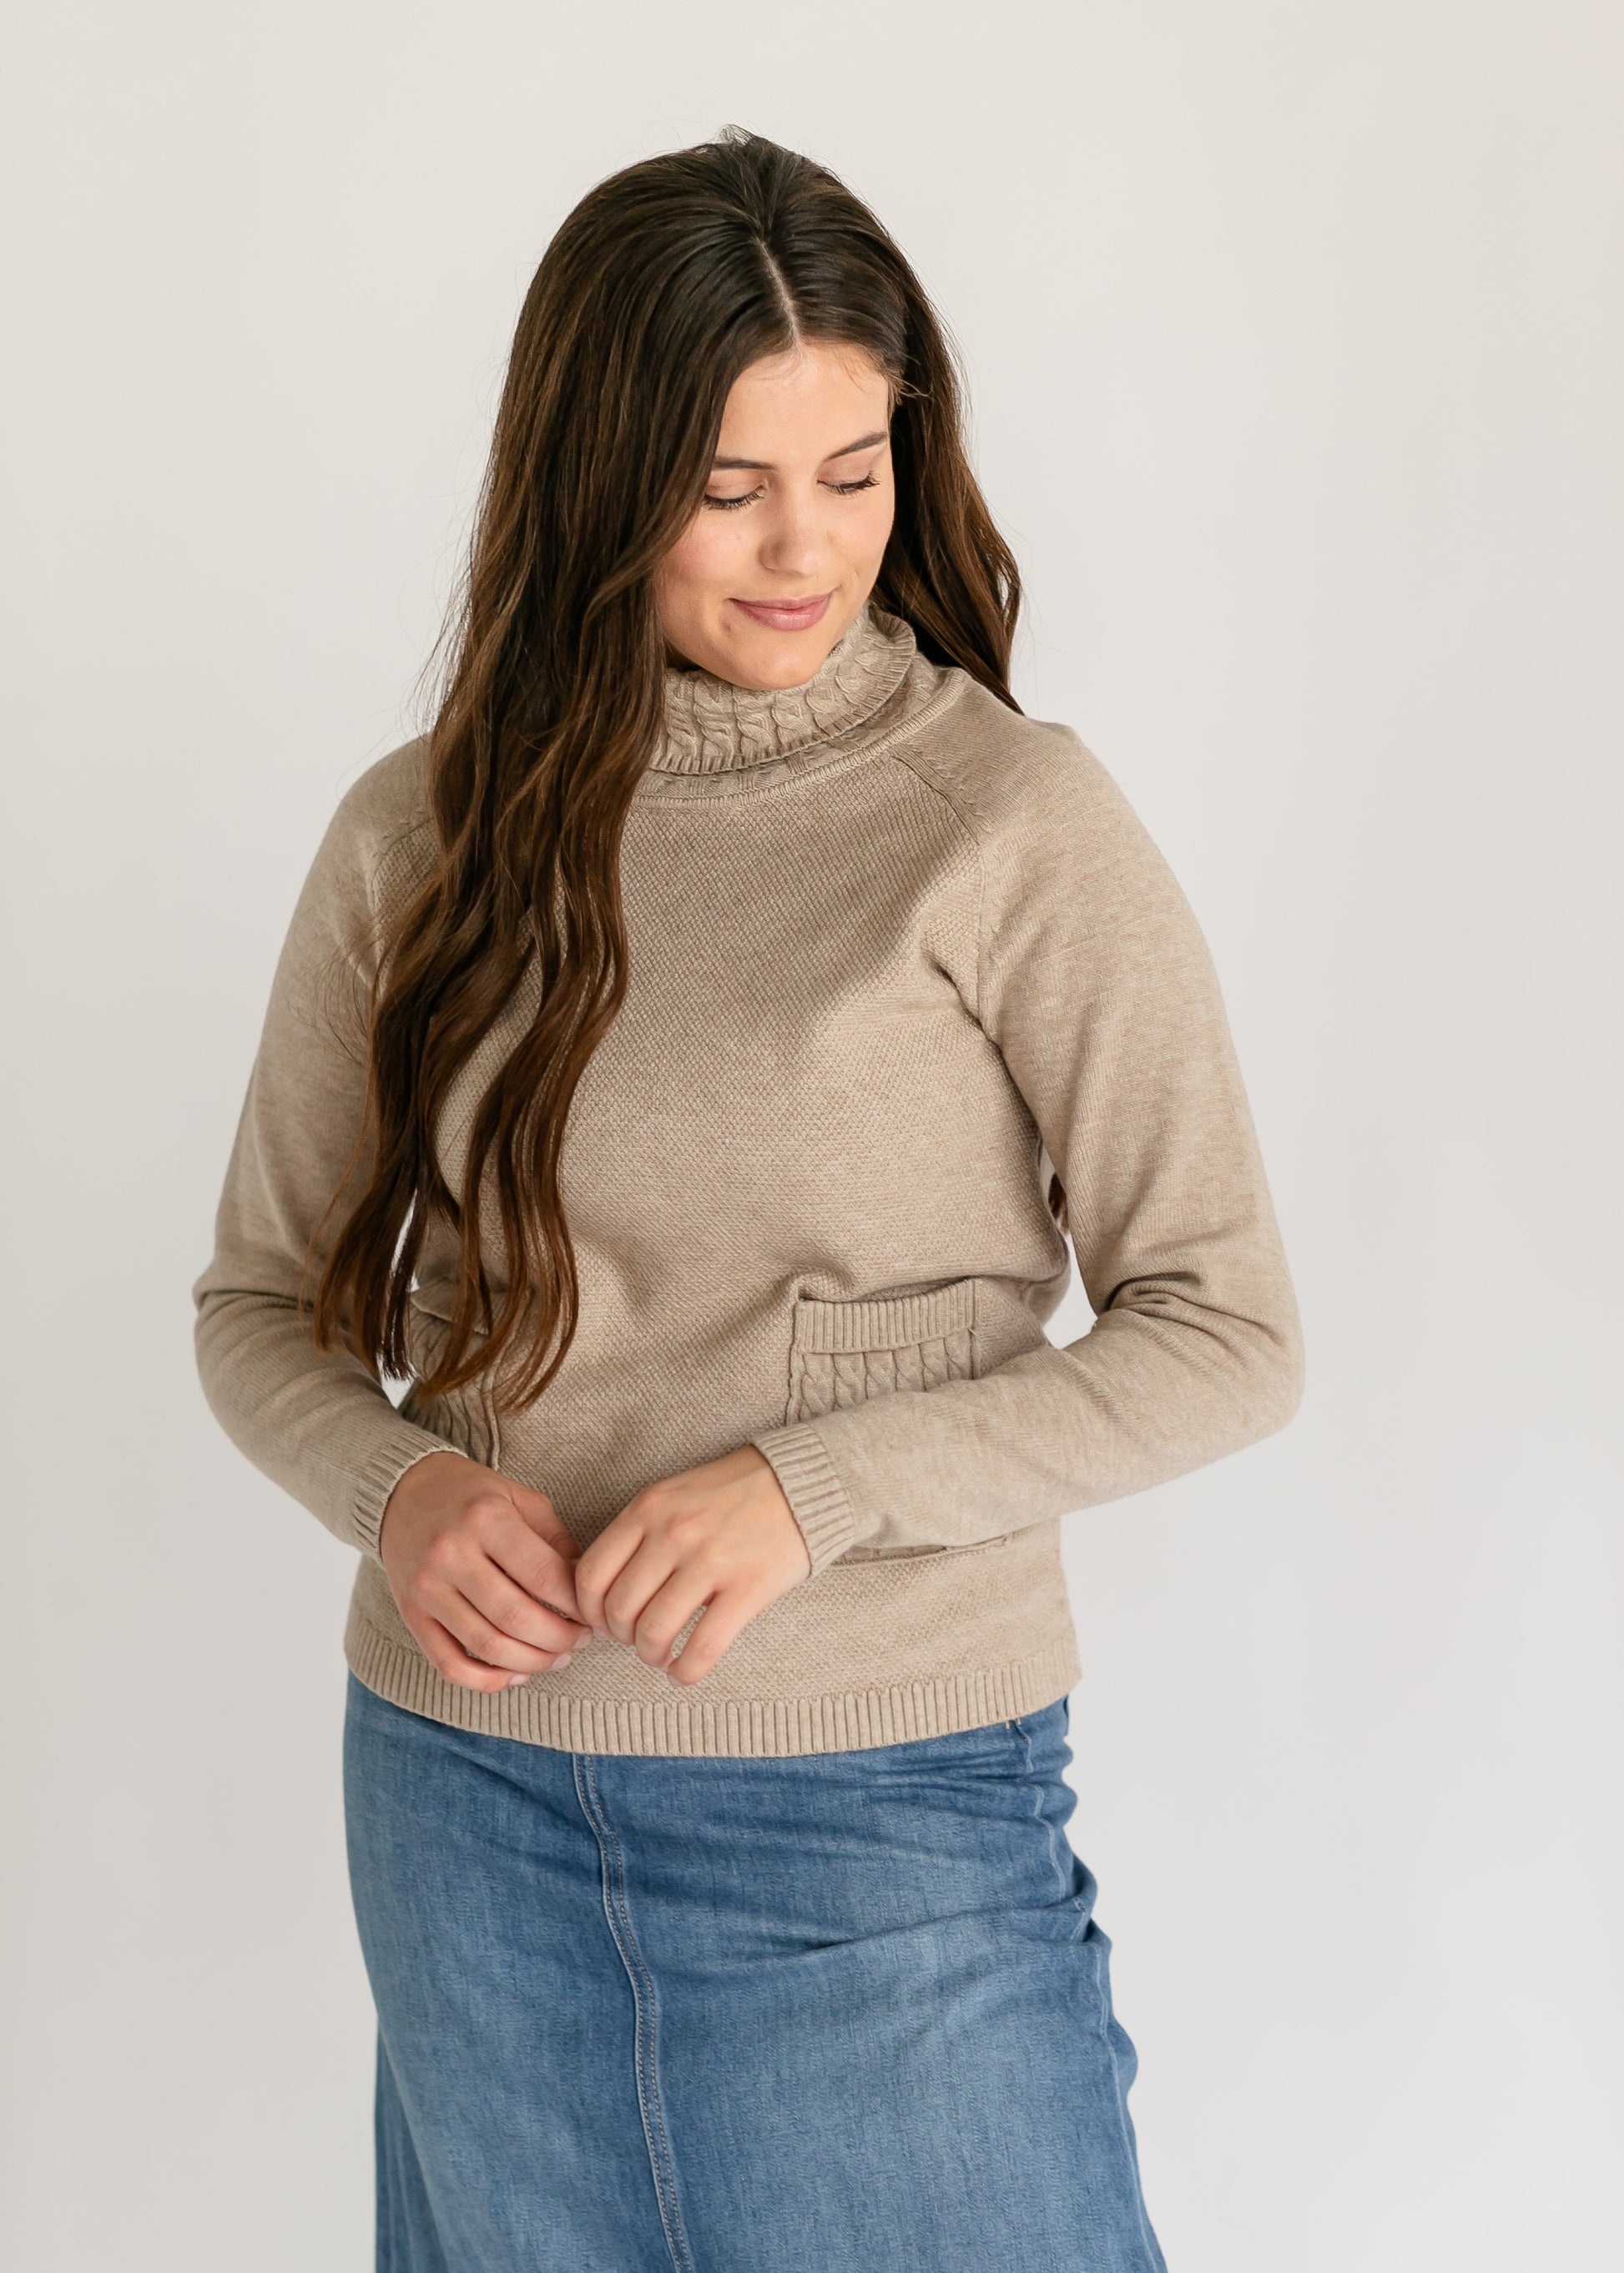 Cable Knit Pocket Turtleneck Sweater FF Tops